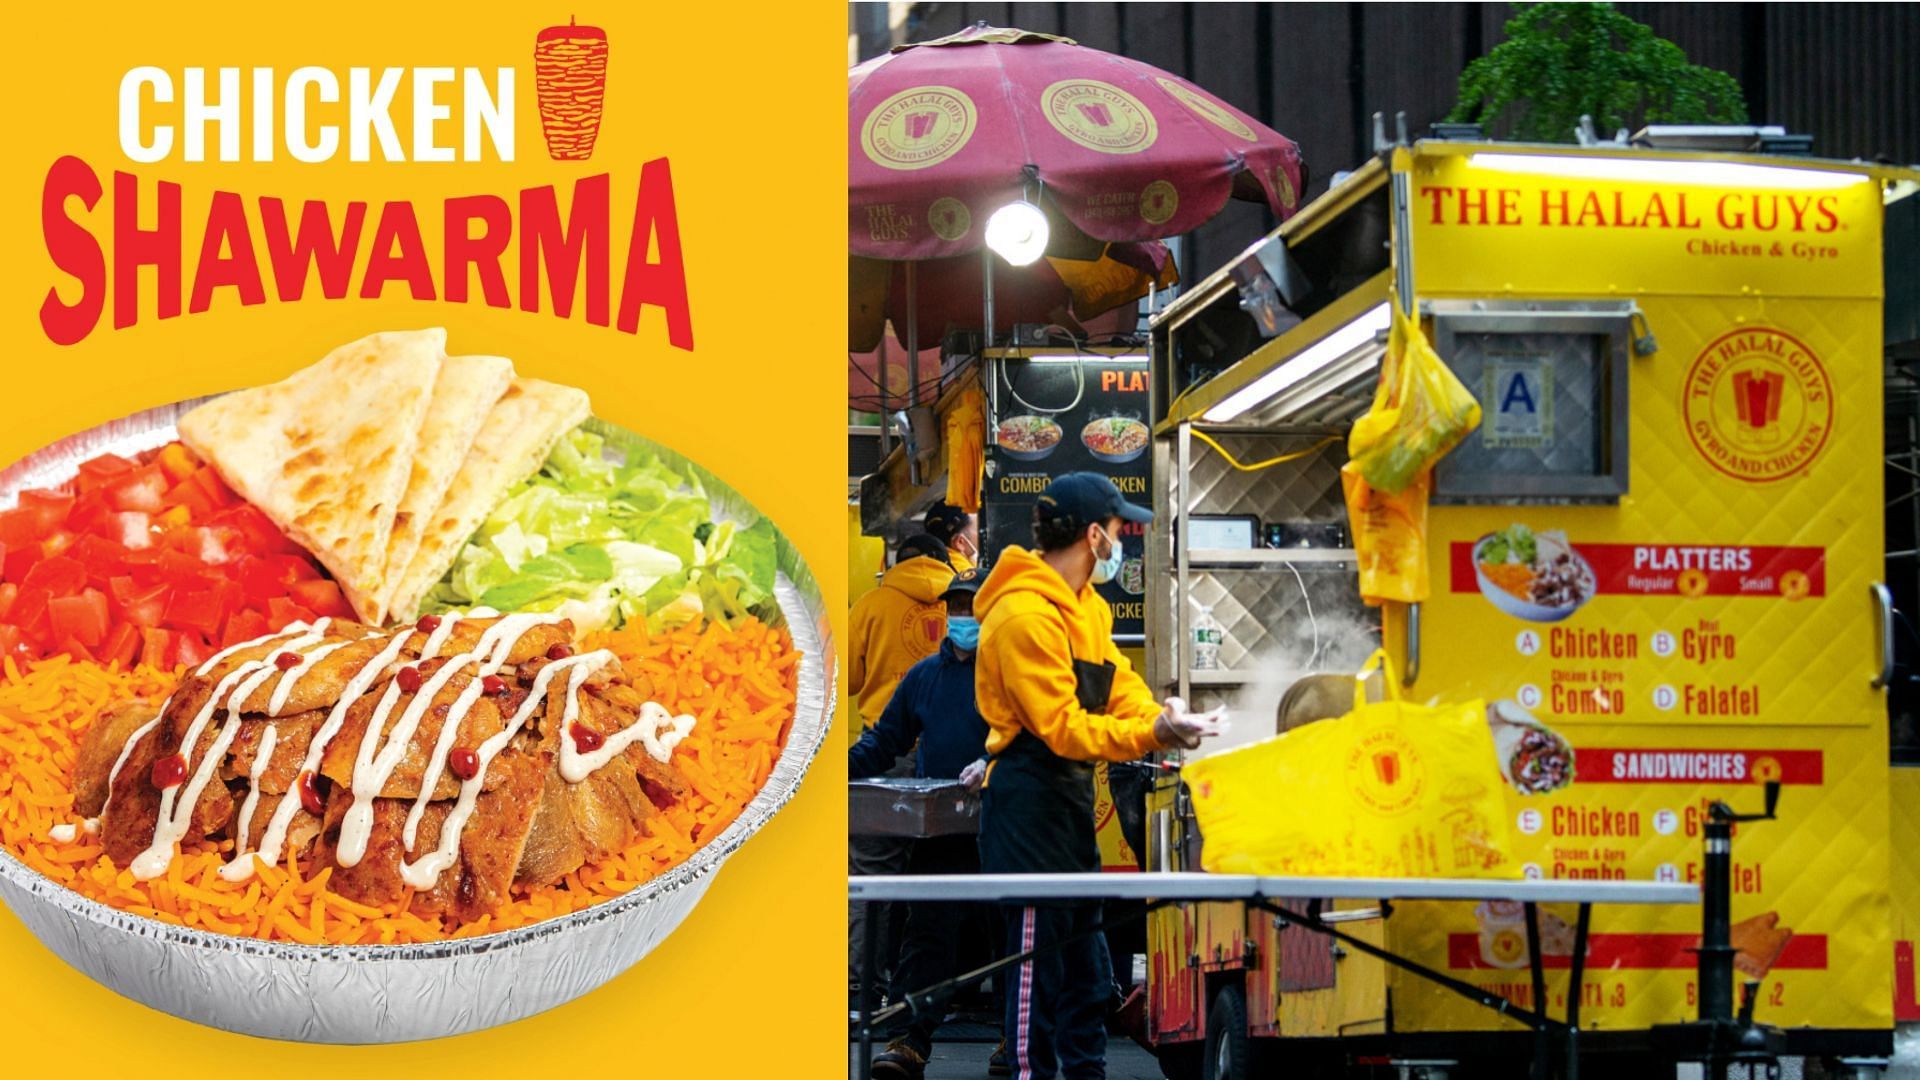 The Halal Guys have launched a new Chicken Shawarma (Image via Alexi Rosenfeld/Getty Images)